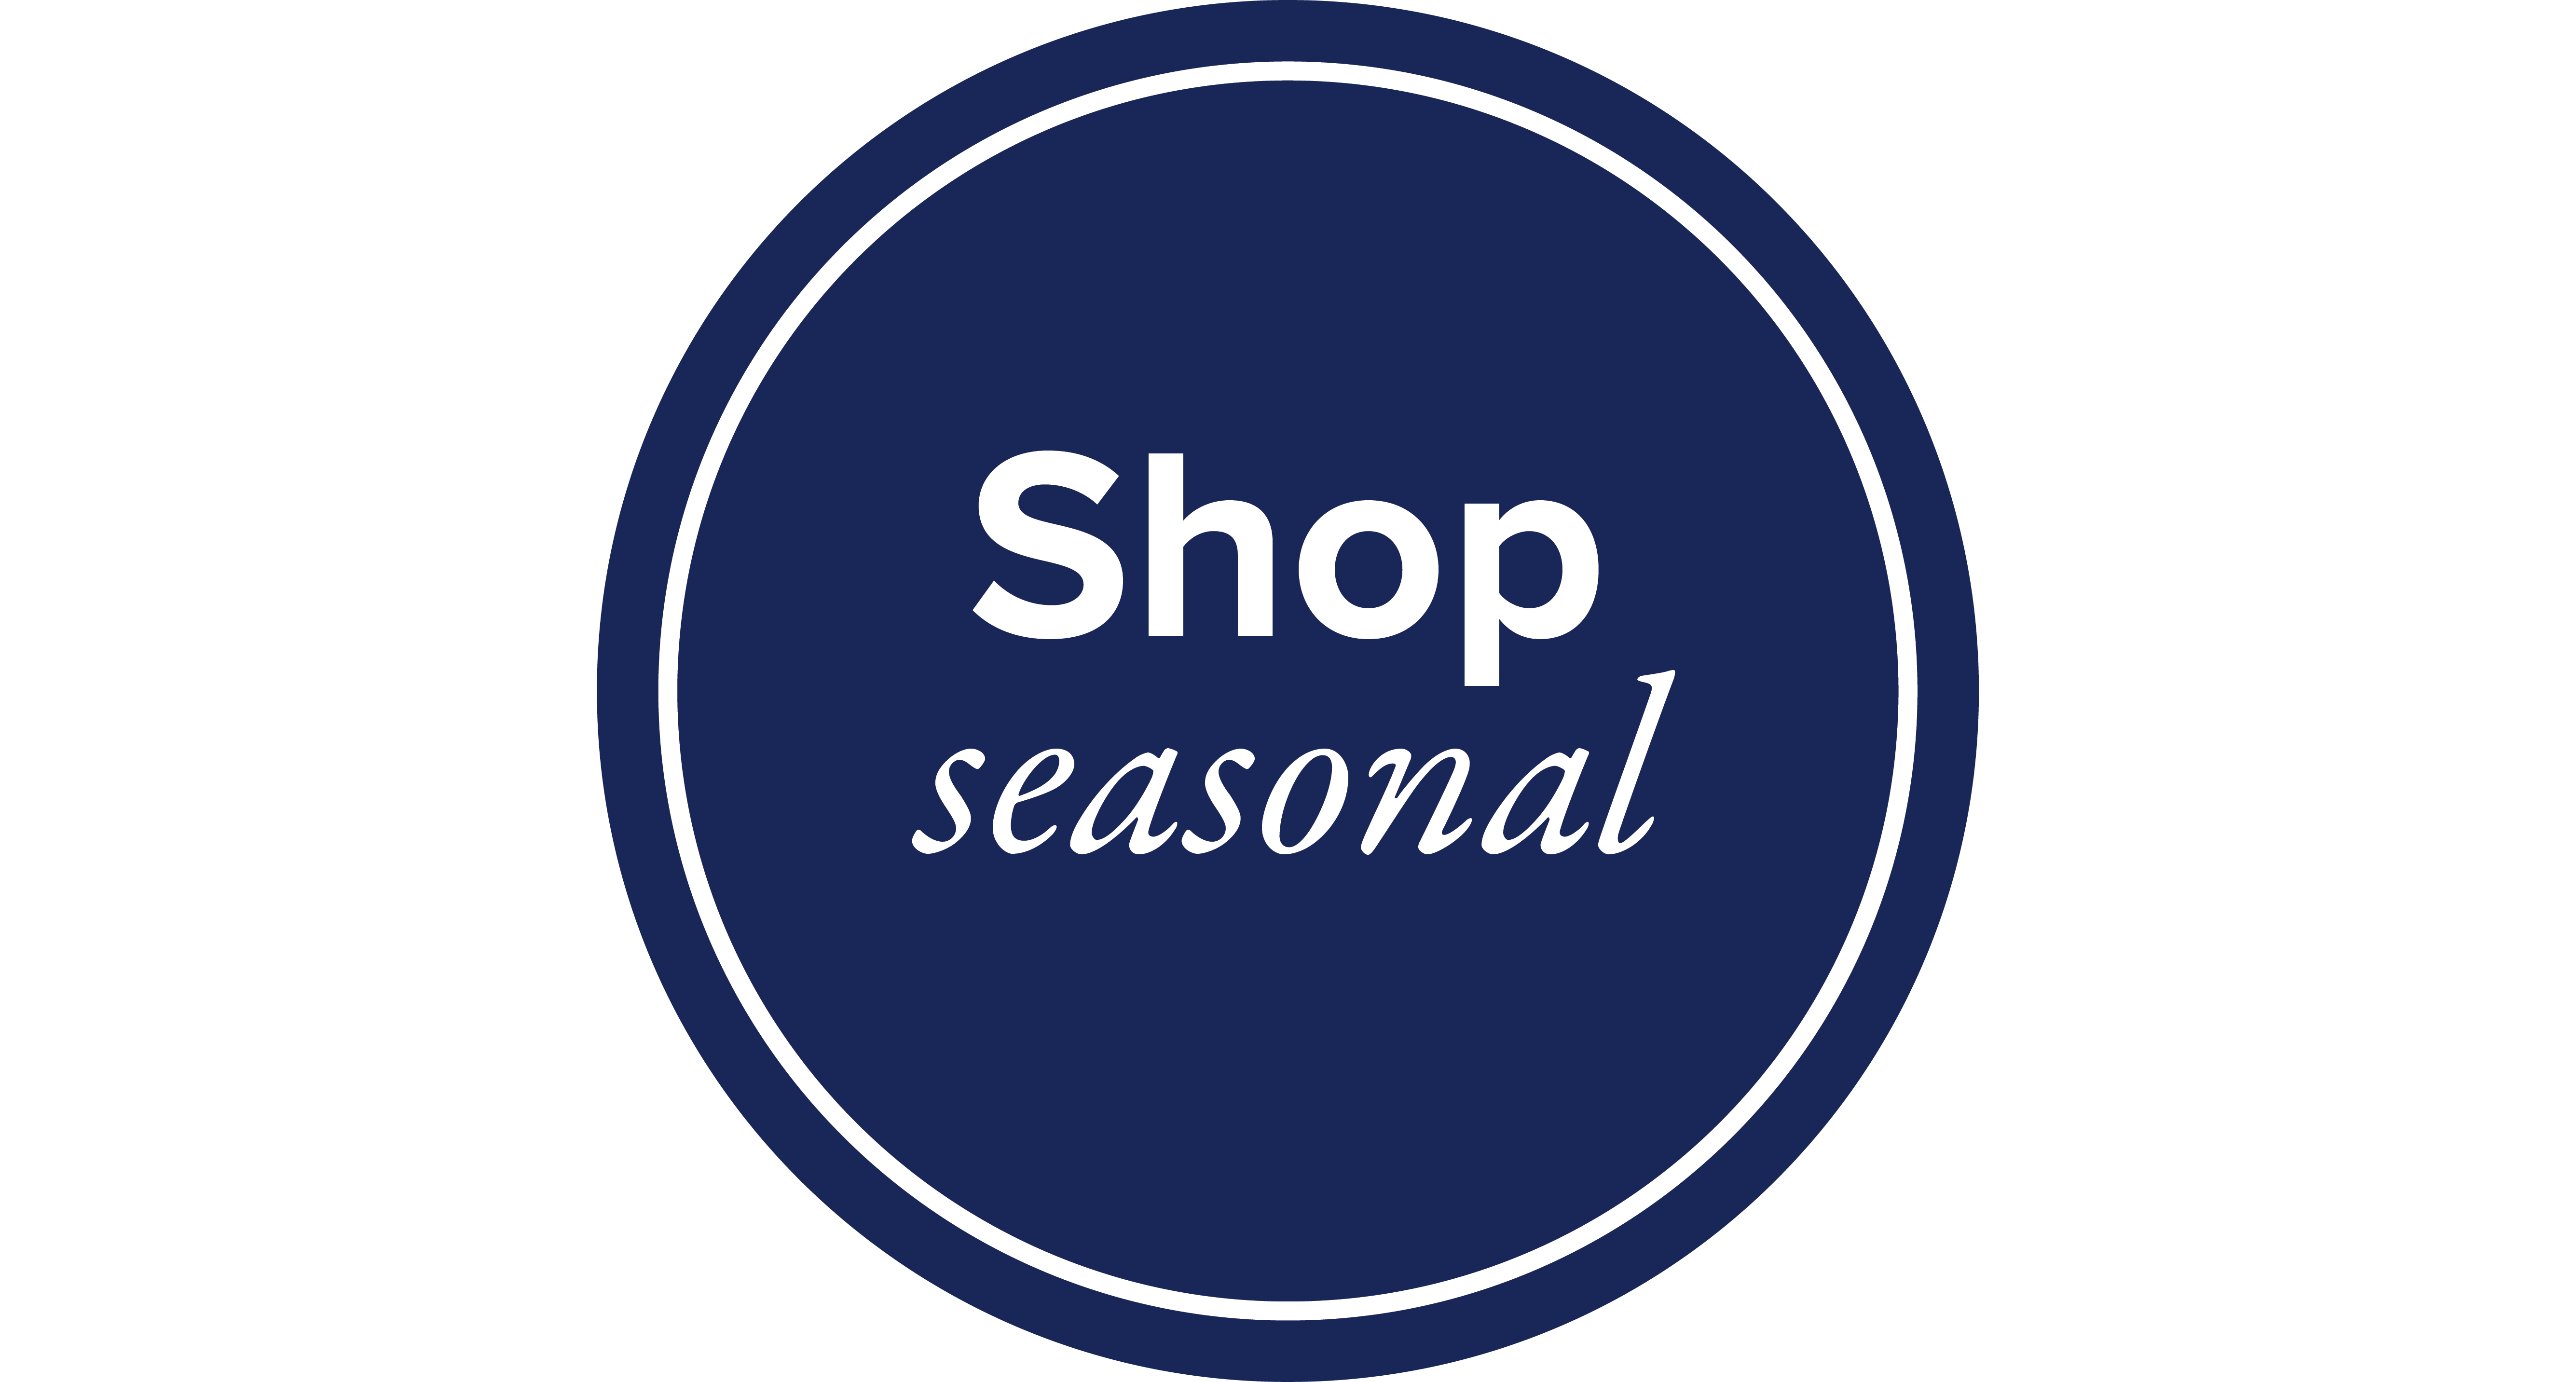 Click here to Shop the BruinShop seasonal collection